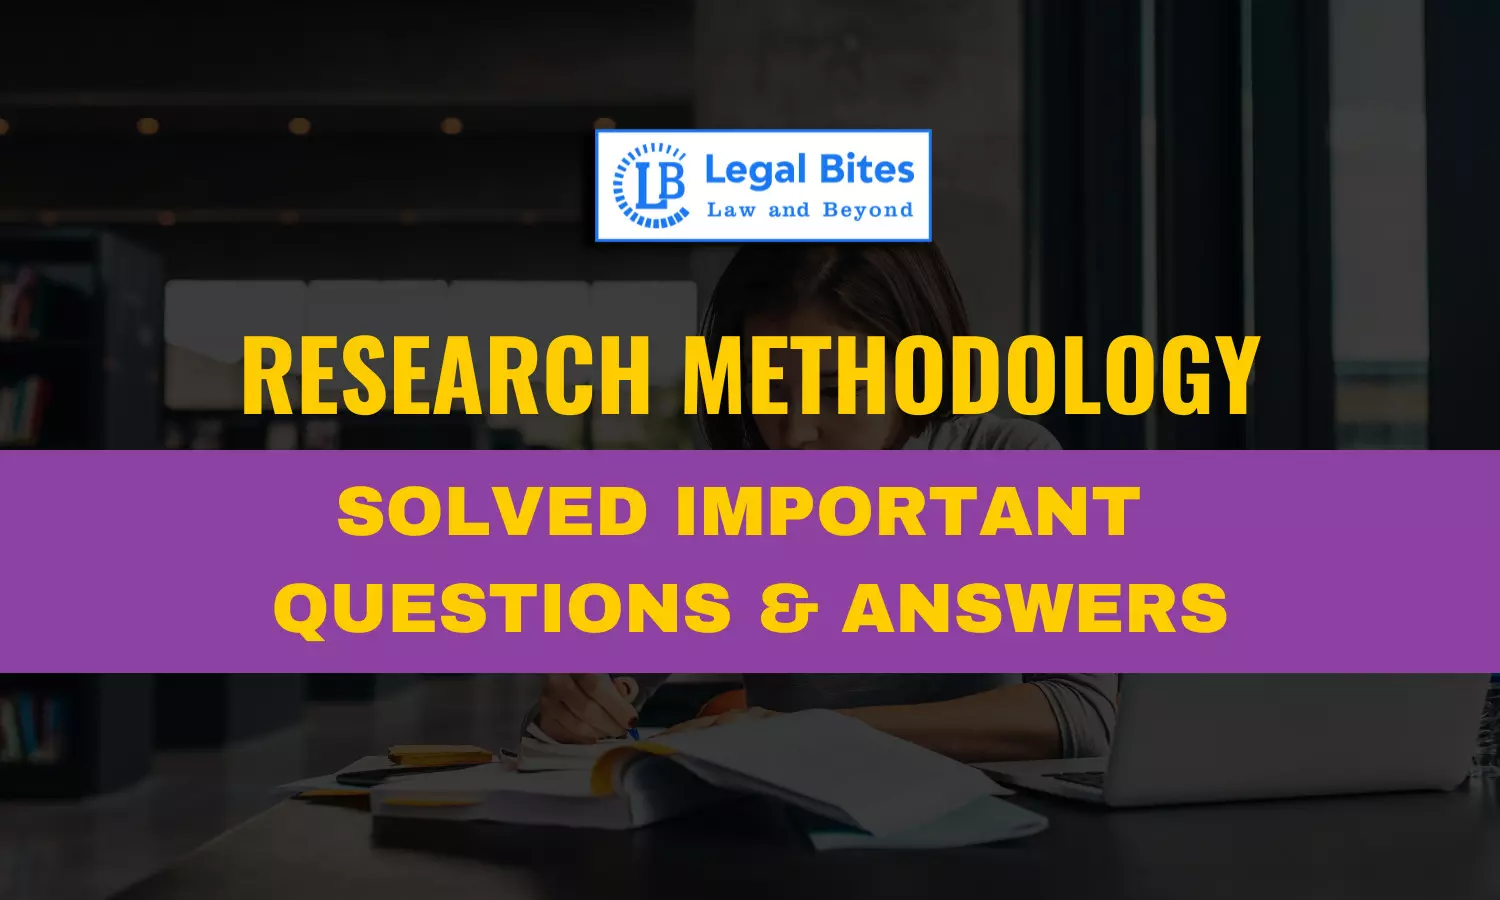 Describe the major steps involved in report writing and advise how to write a good research report in legal research.